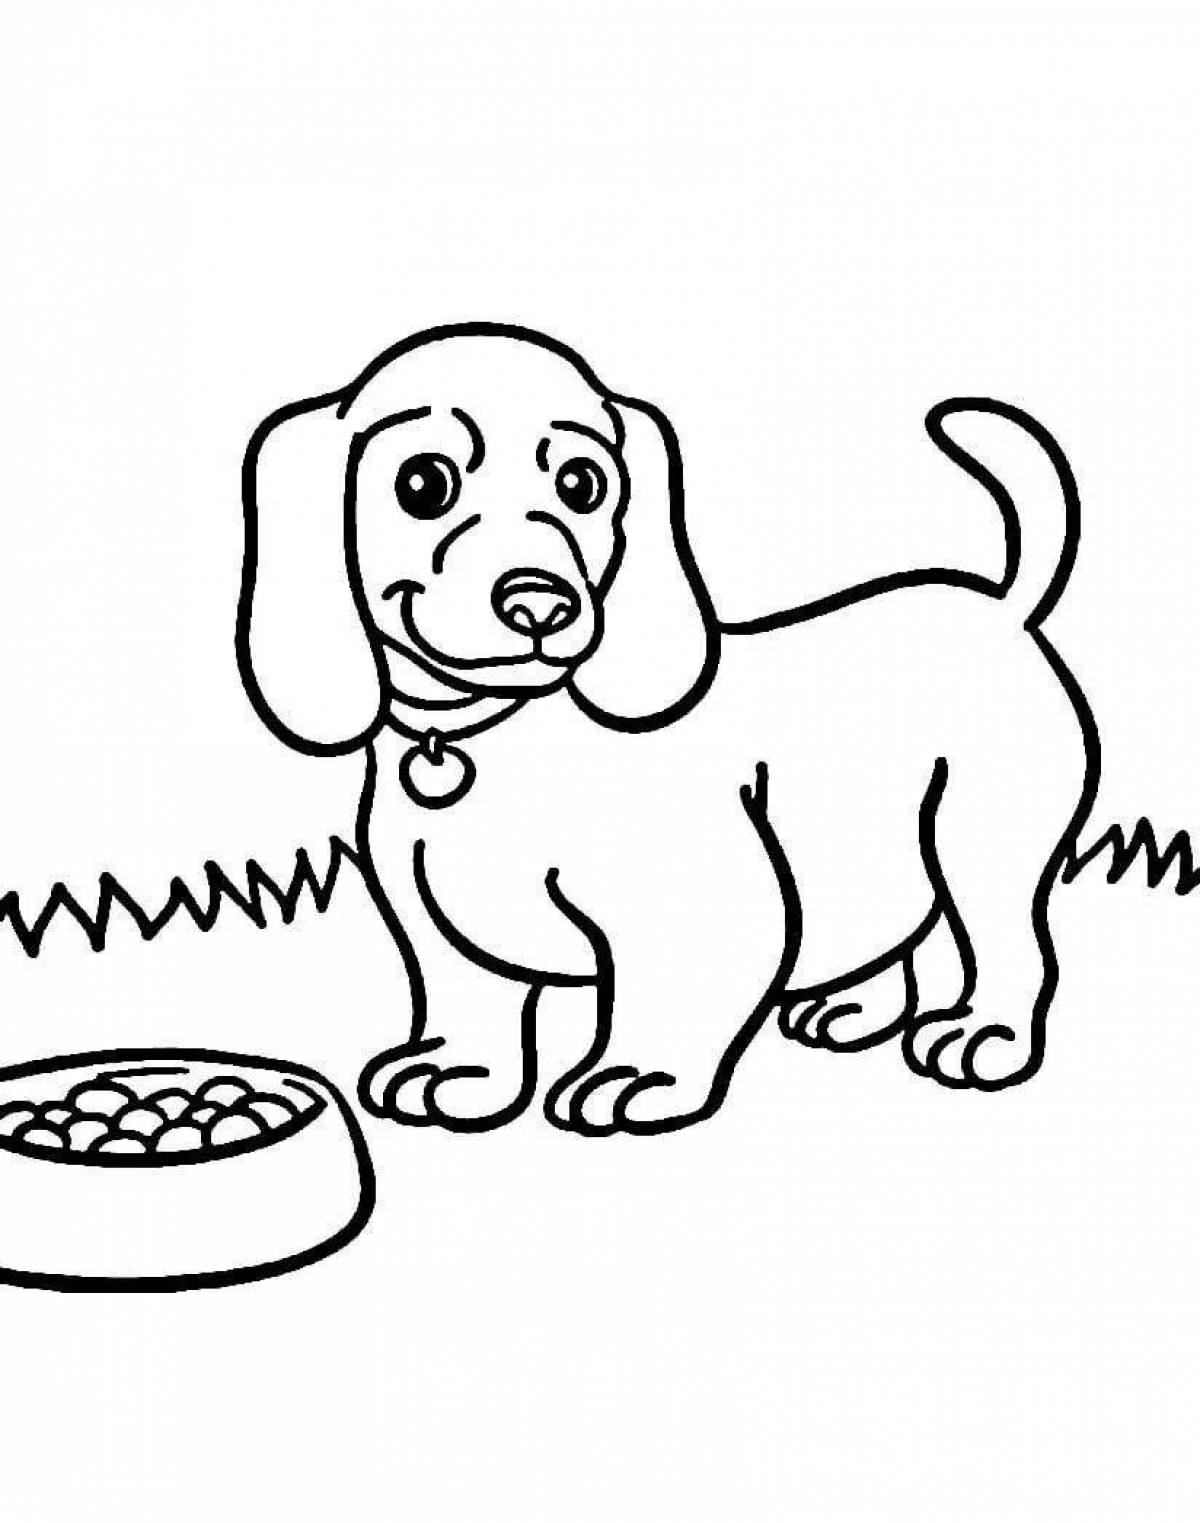 Colorful cardboard dog coloring page